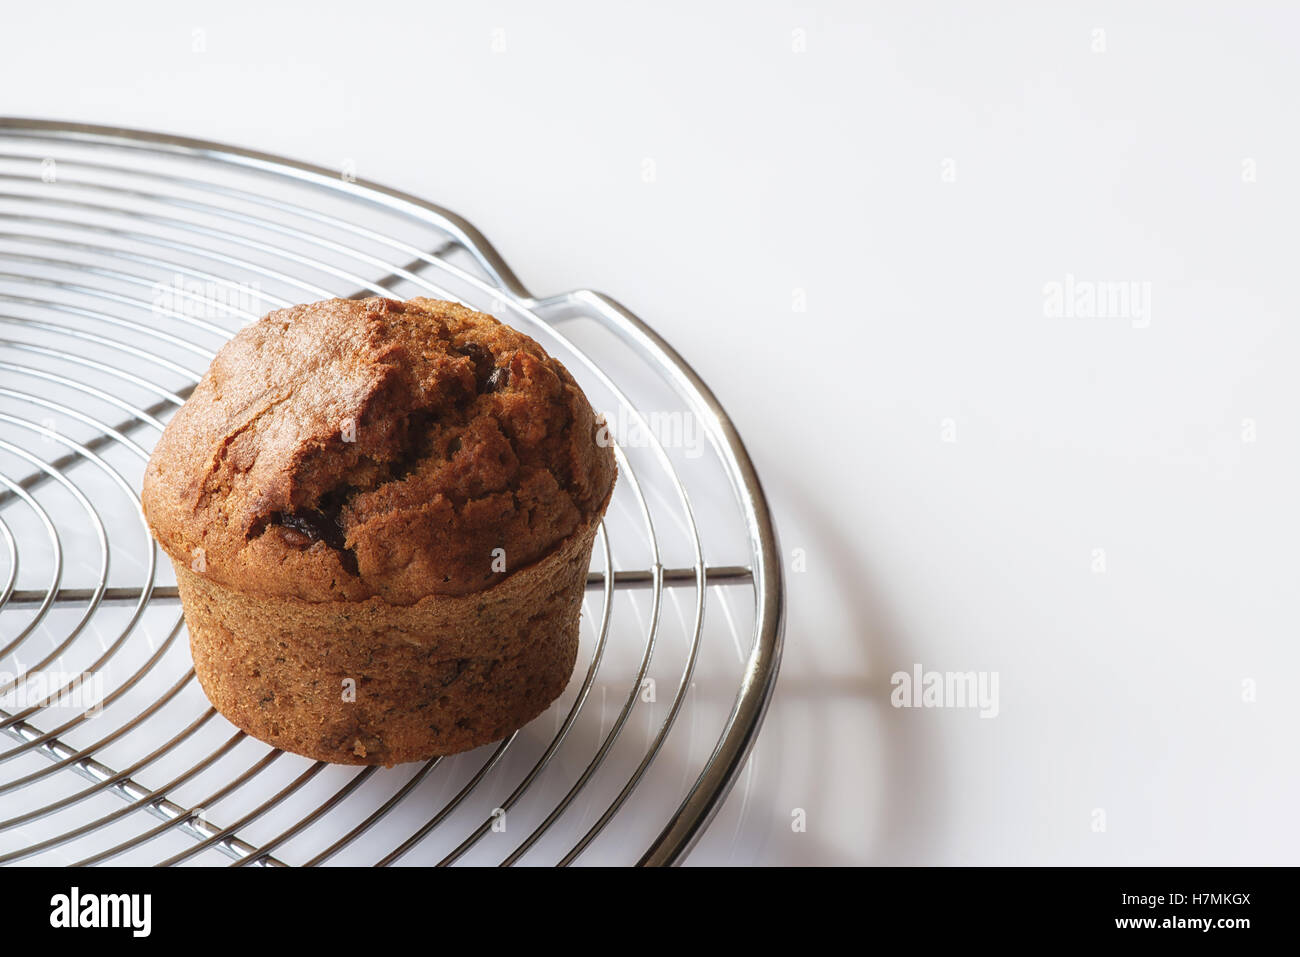 Fresh home made muffin on a cake grate, single muffin, wihte background Stock Photo